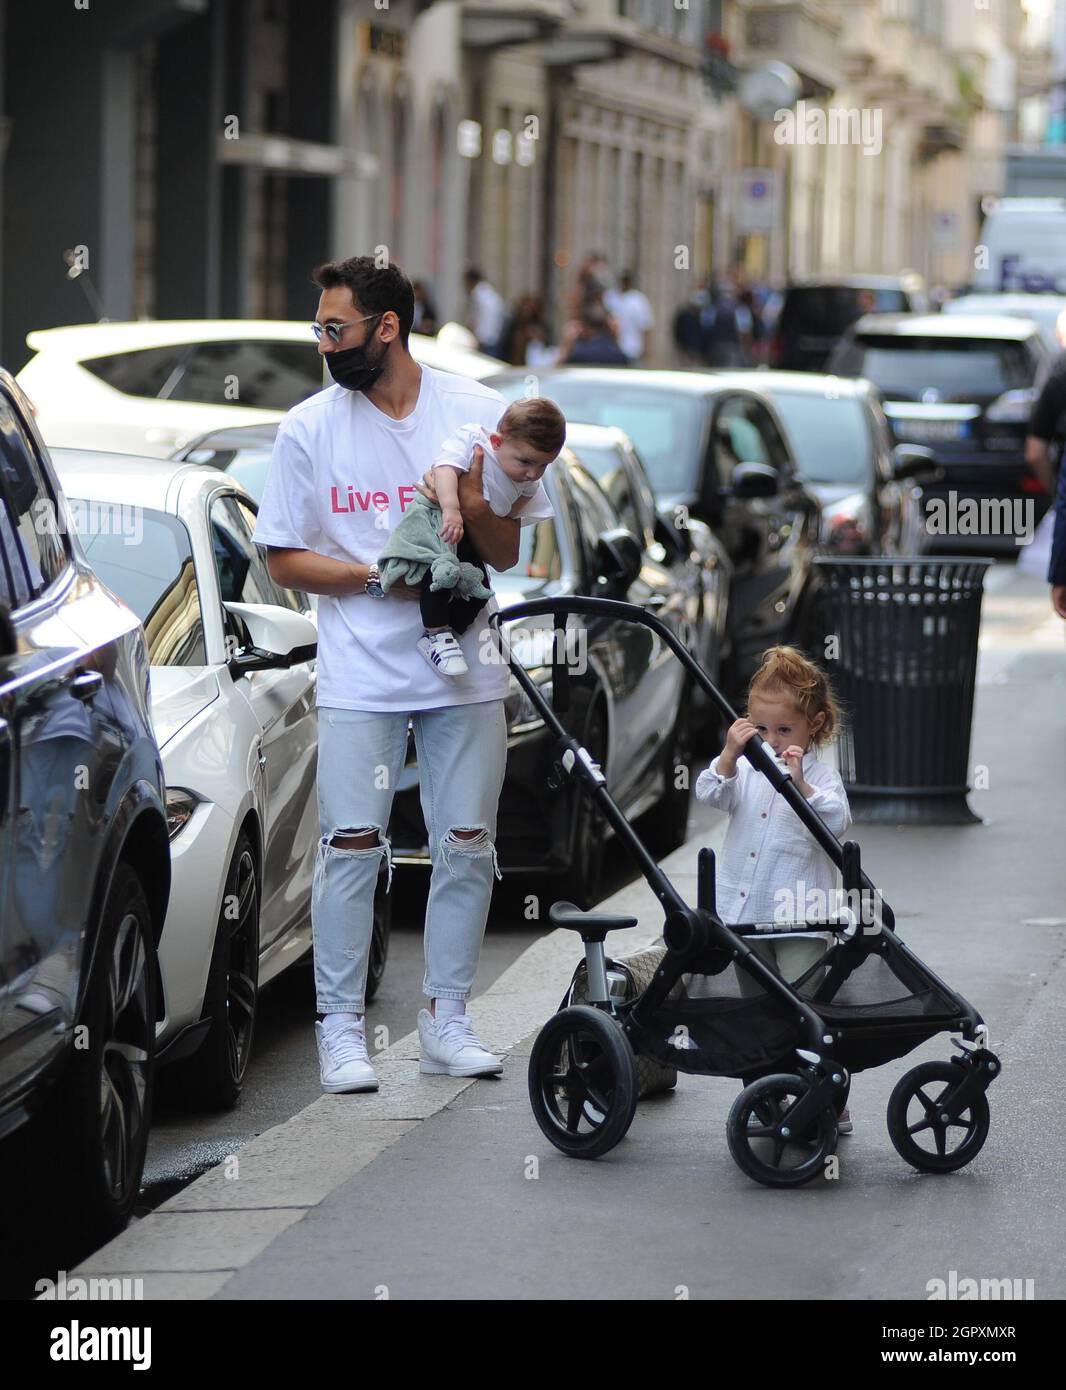 Milan, . 30th Sep, 2021. Milan, 30-9-2021 Hakan Calhanoglu, player of INTER  and of the national team of TURKEY, arrives in the center with his wife  Sinem Gundogdu and their children Liya